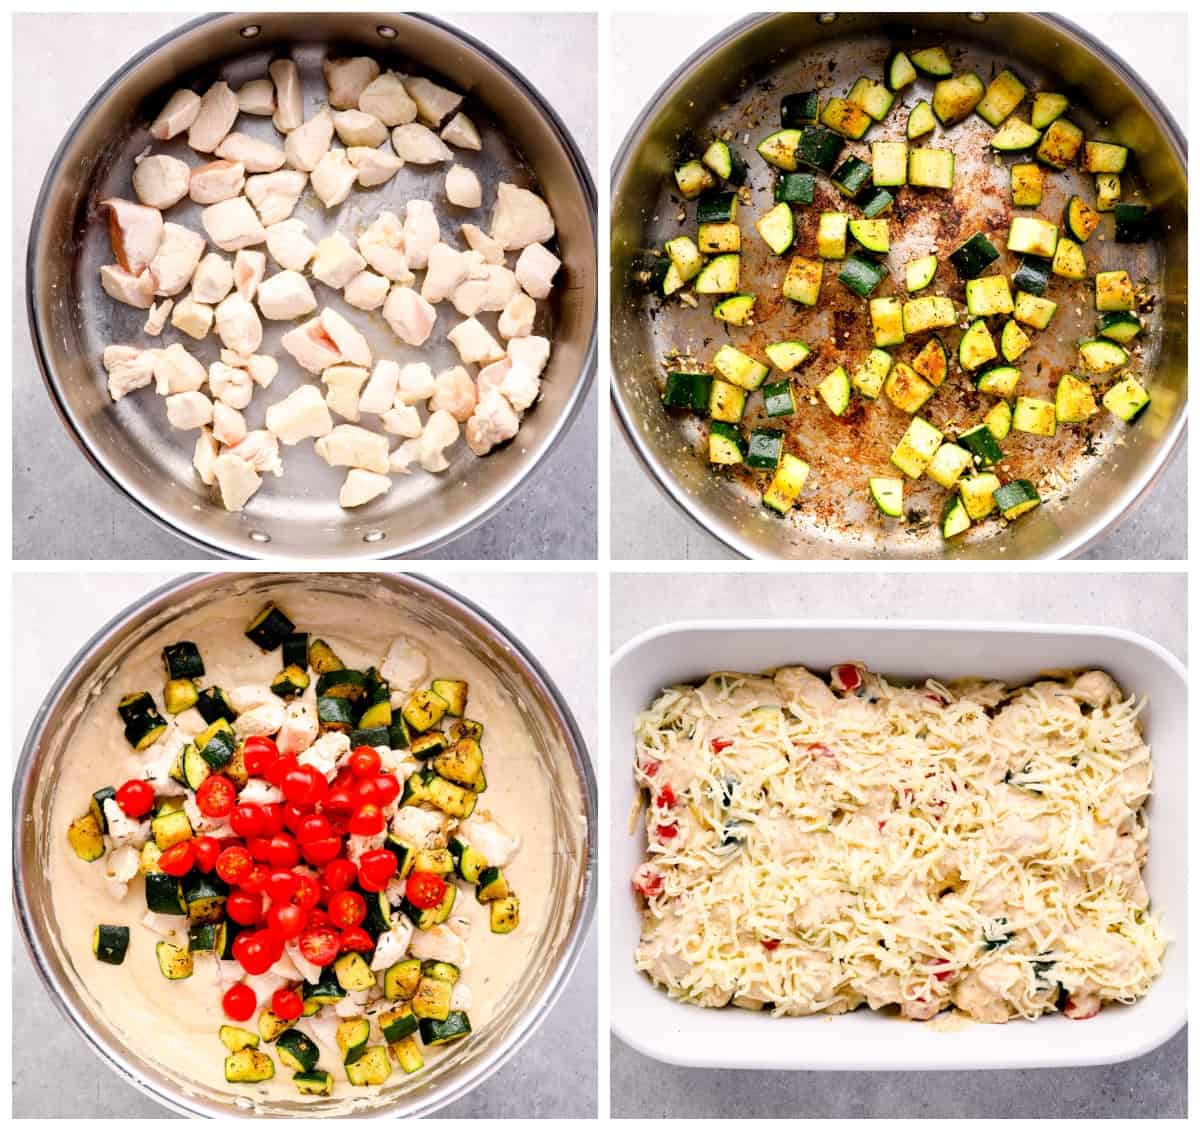 how to make chicken zucchini casserole step by step photo instructions